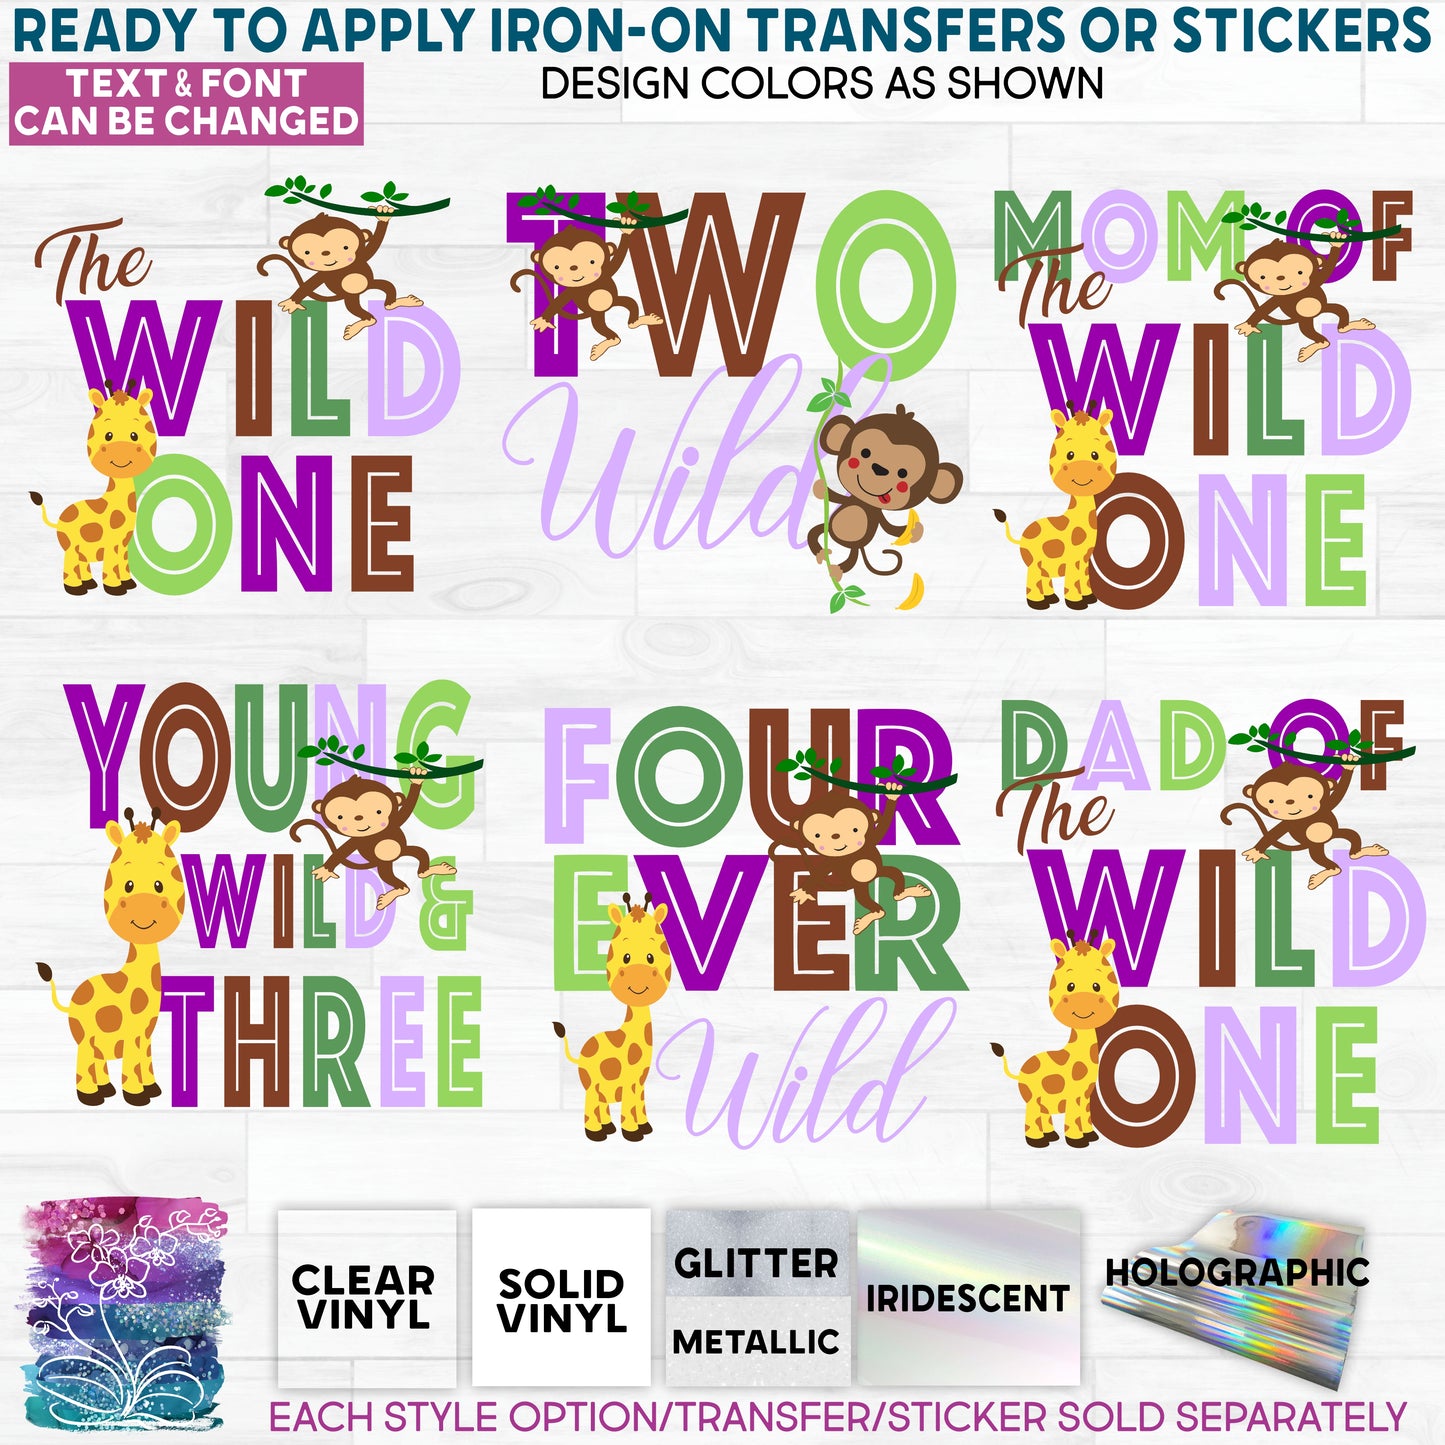 (s132-2D) Jungle Family, Mom of the Wild One, Custom Text Glitter or Vinyl Iron-On Transfer or Sticker